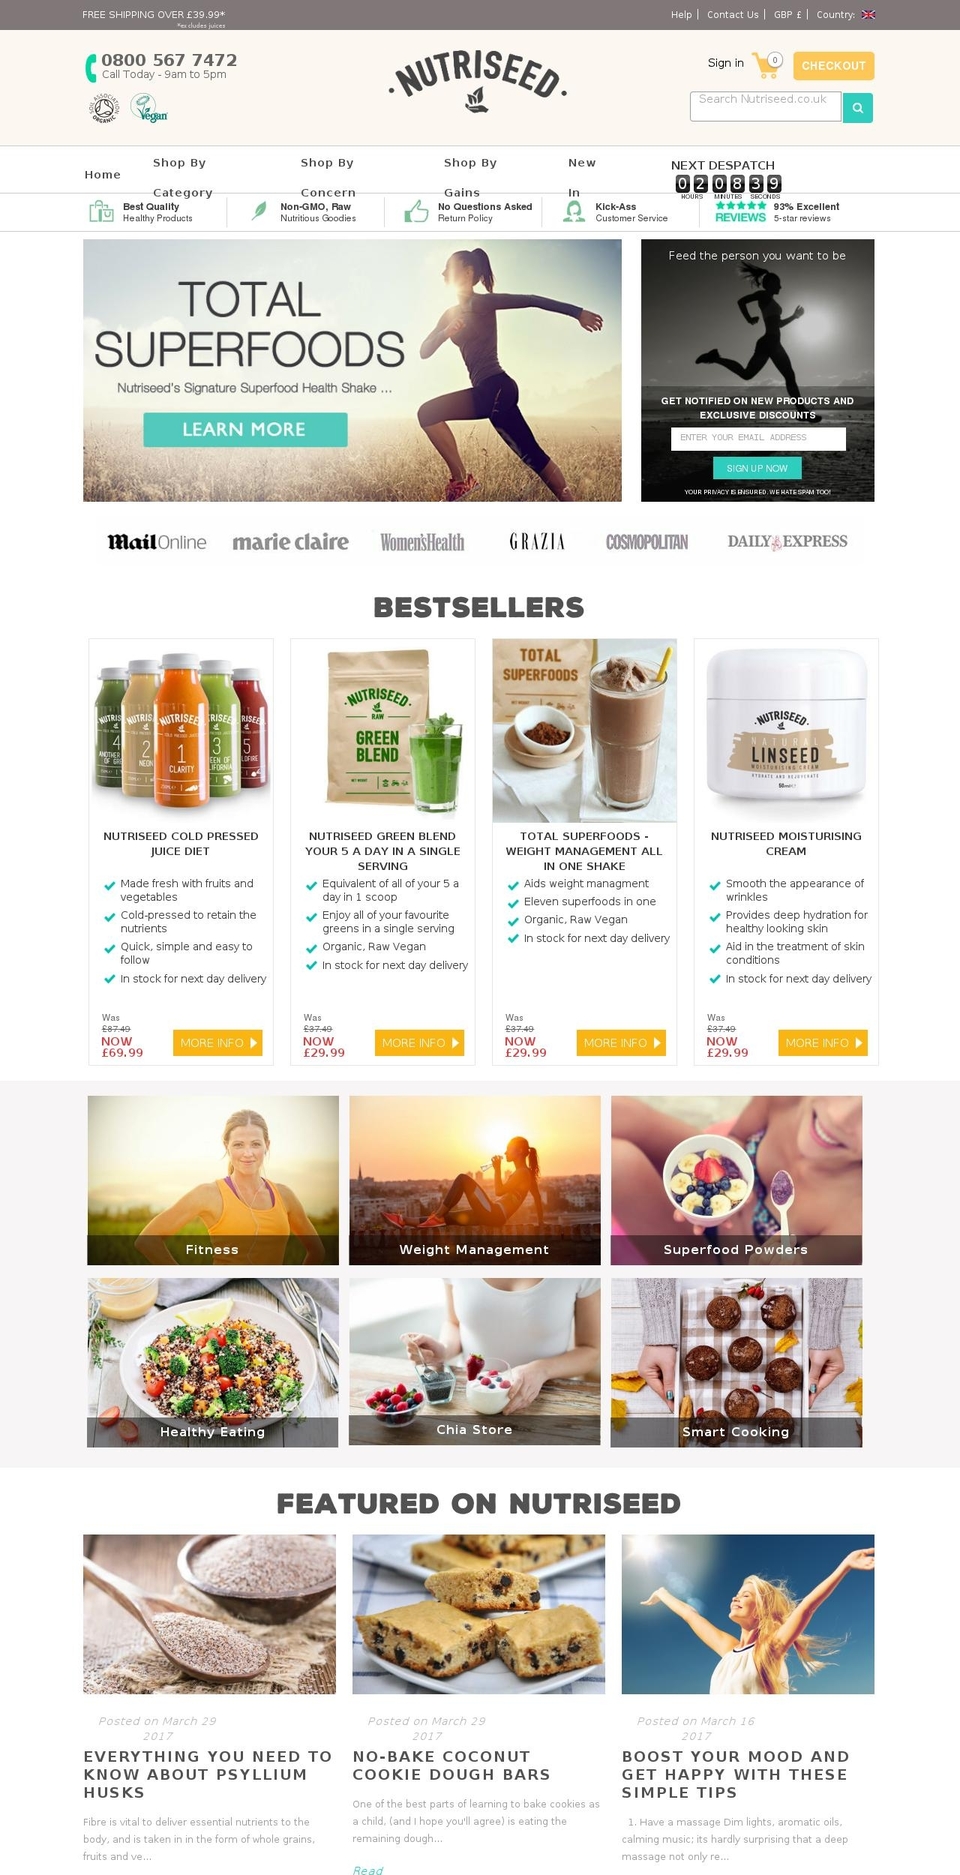 Mr Parker Shopify theme site example nutriseed.co.uk